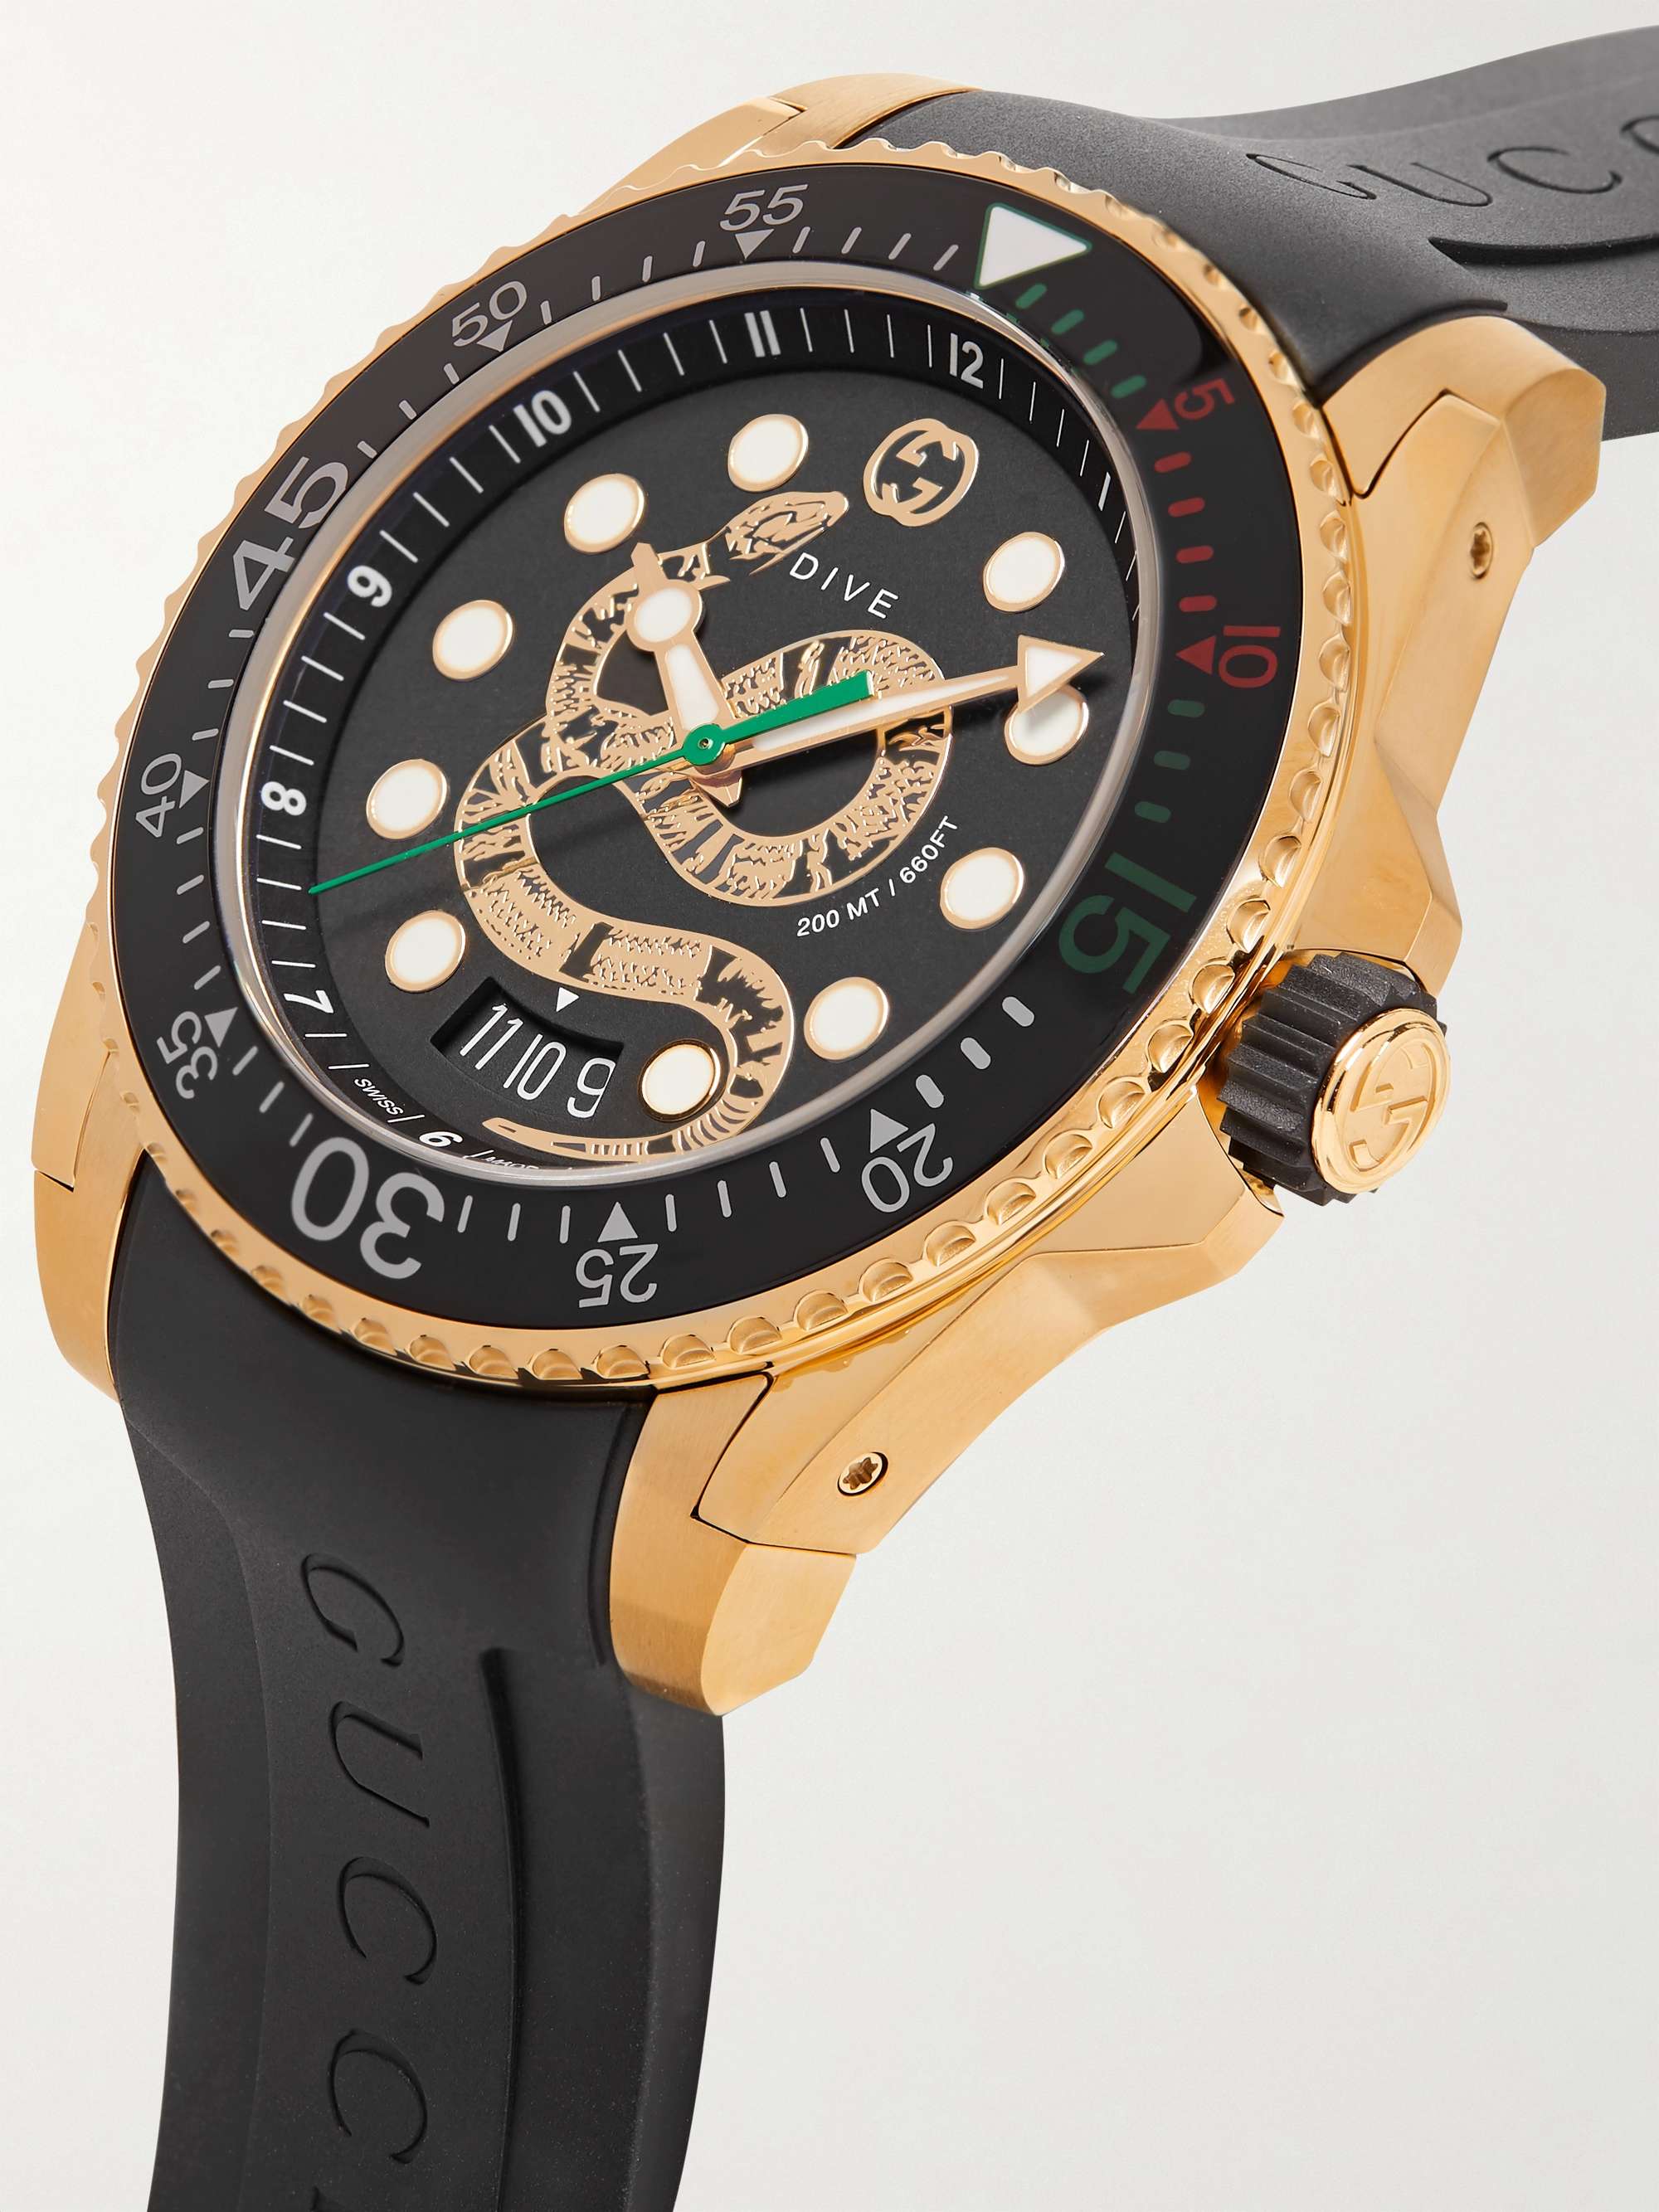 GUCCI Dive 45mm Gold PVD-Coated Watch with Rubber Strap